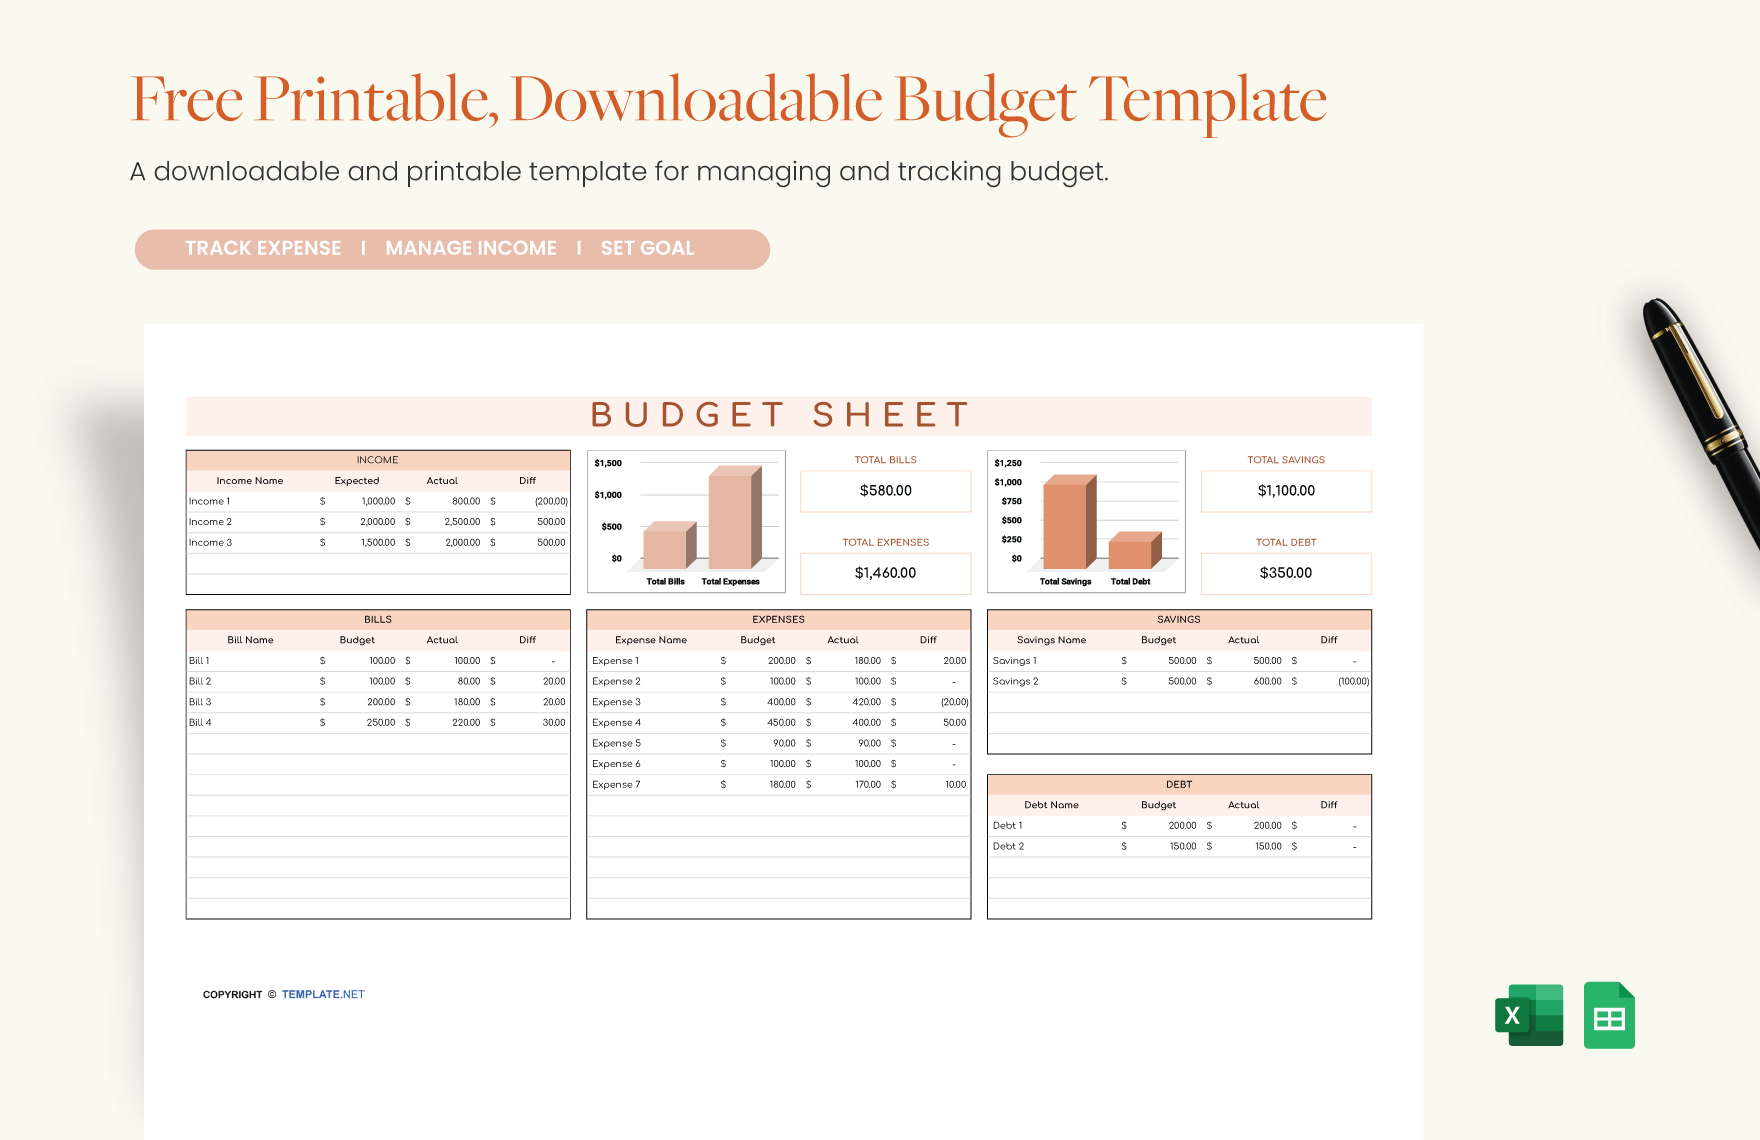 Free Printable, Downloadable Budget Template